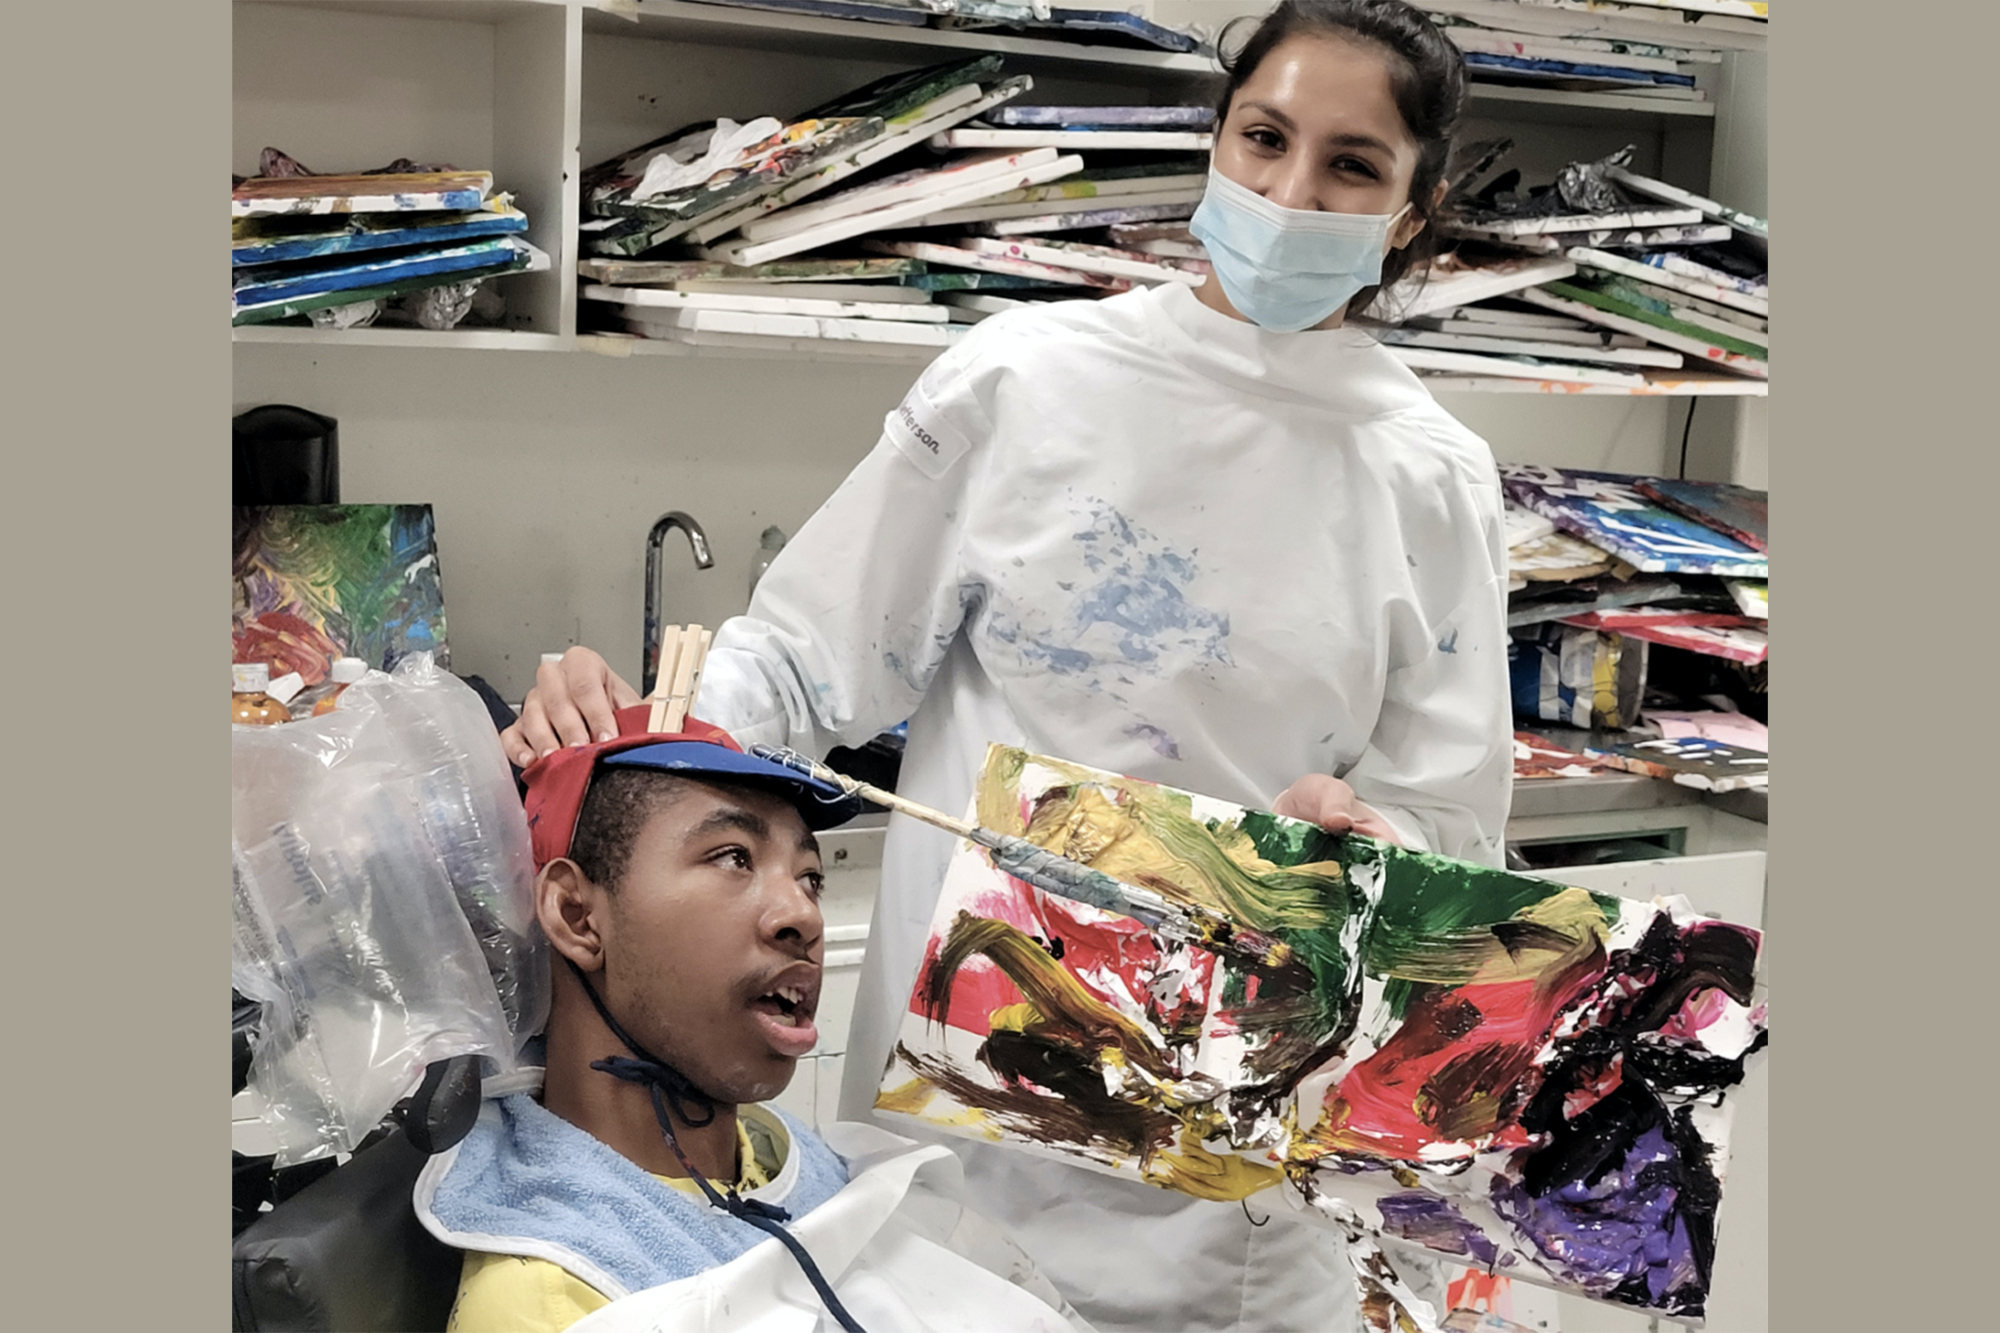 Nursing student Aman Uppal assists a student from the HMS School for Children with Cerebral Palsy during art class. She holds up a painting, and painting supplies are all around.